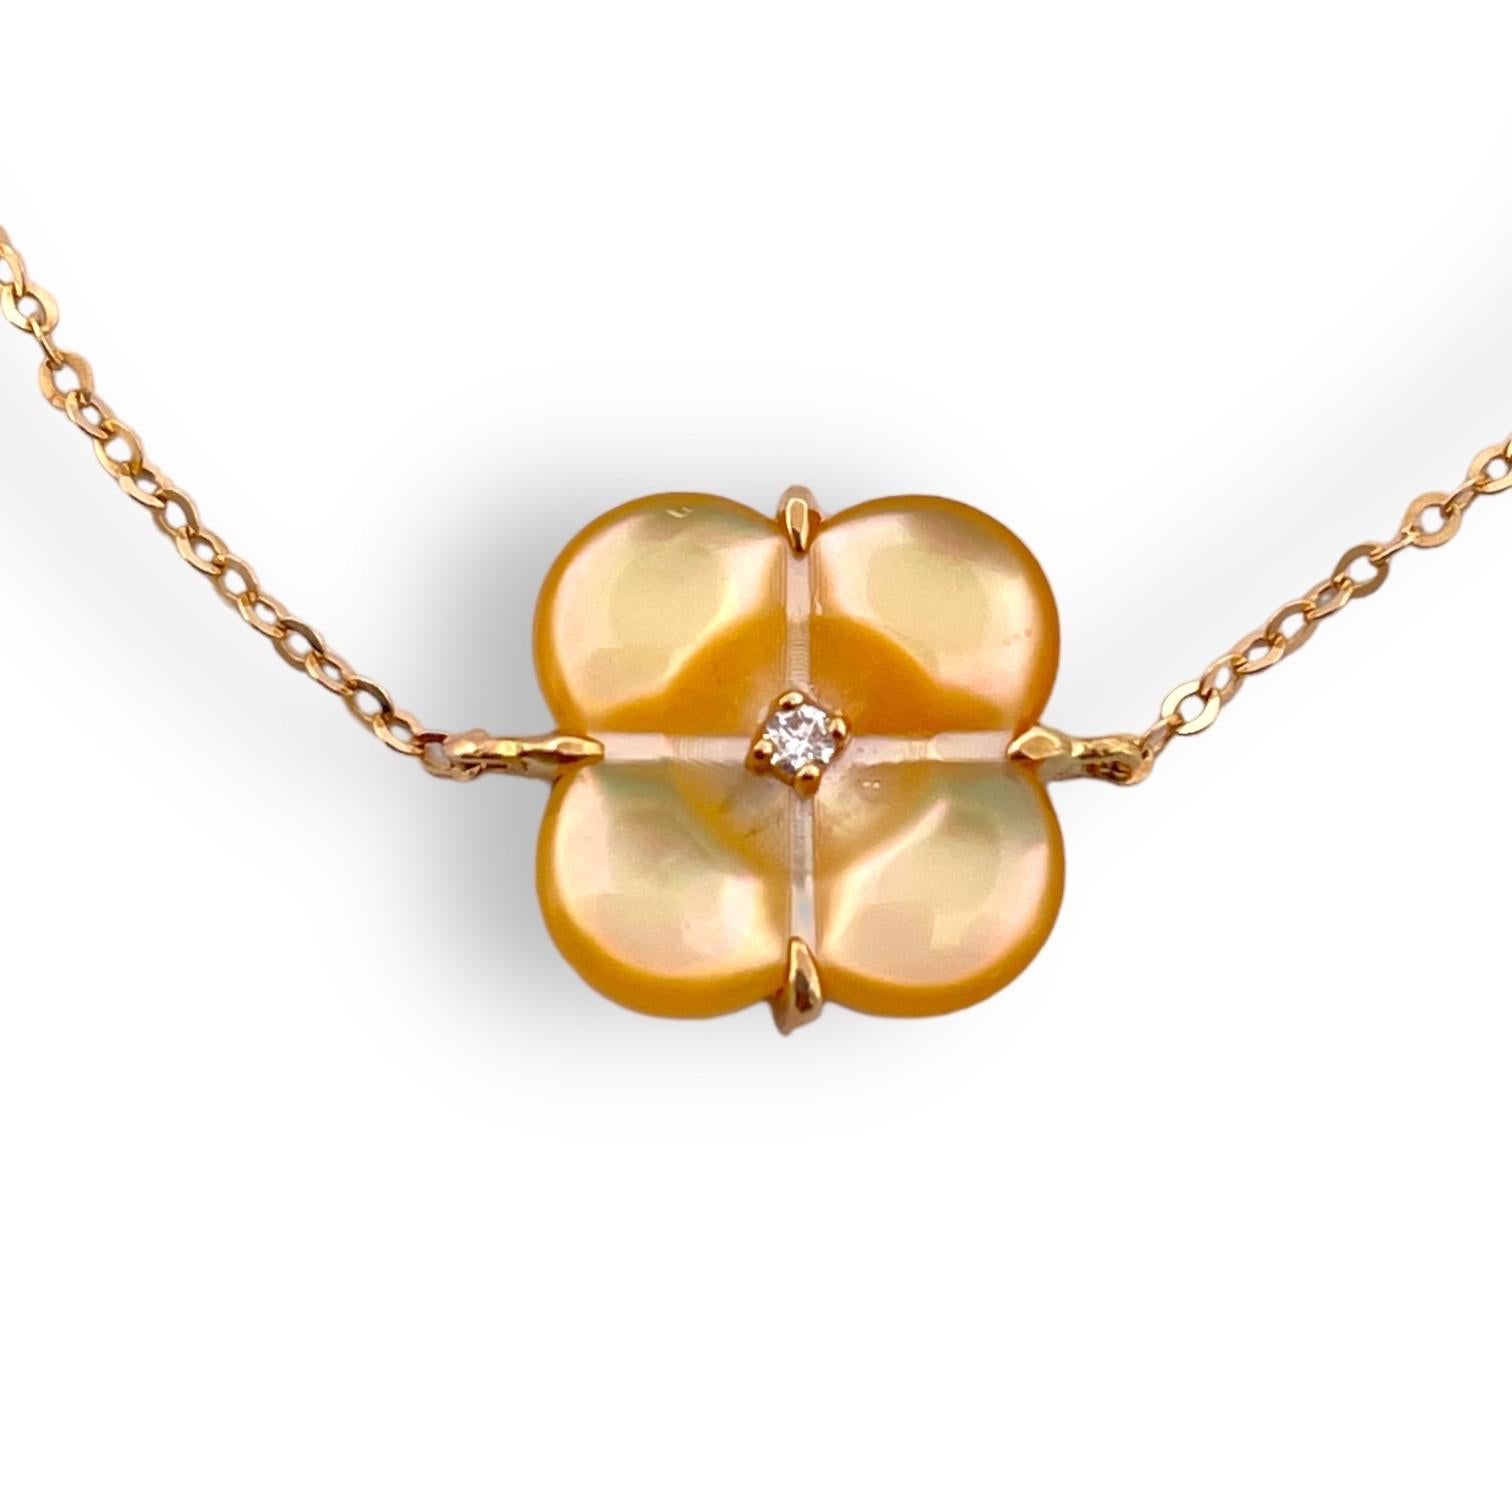 The 18K yellow gold golden mother of pearl clover bracelet is a dazzling and refined accessory that seamlessly blends classic elegance style.
Crafted from solid 18-karat yellow gold, the bracelet features a series of clover motifs, each adorned with